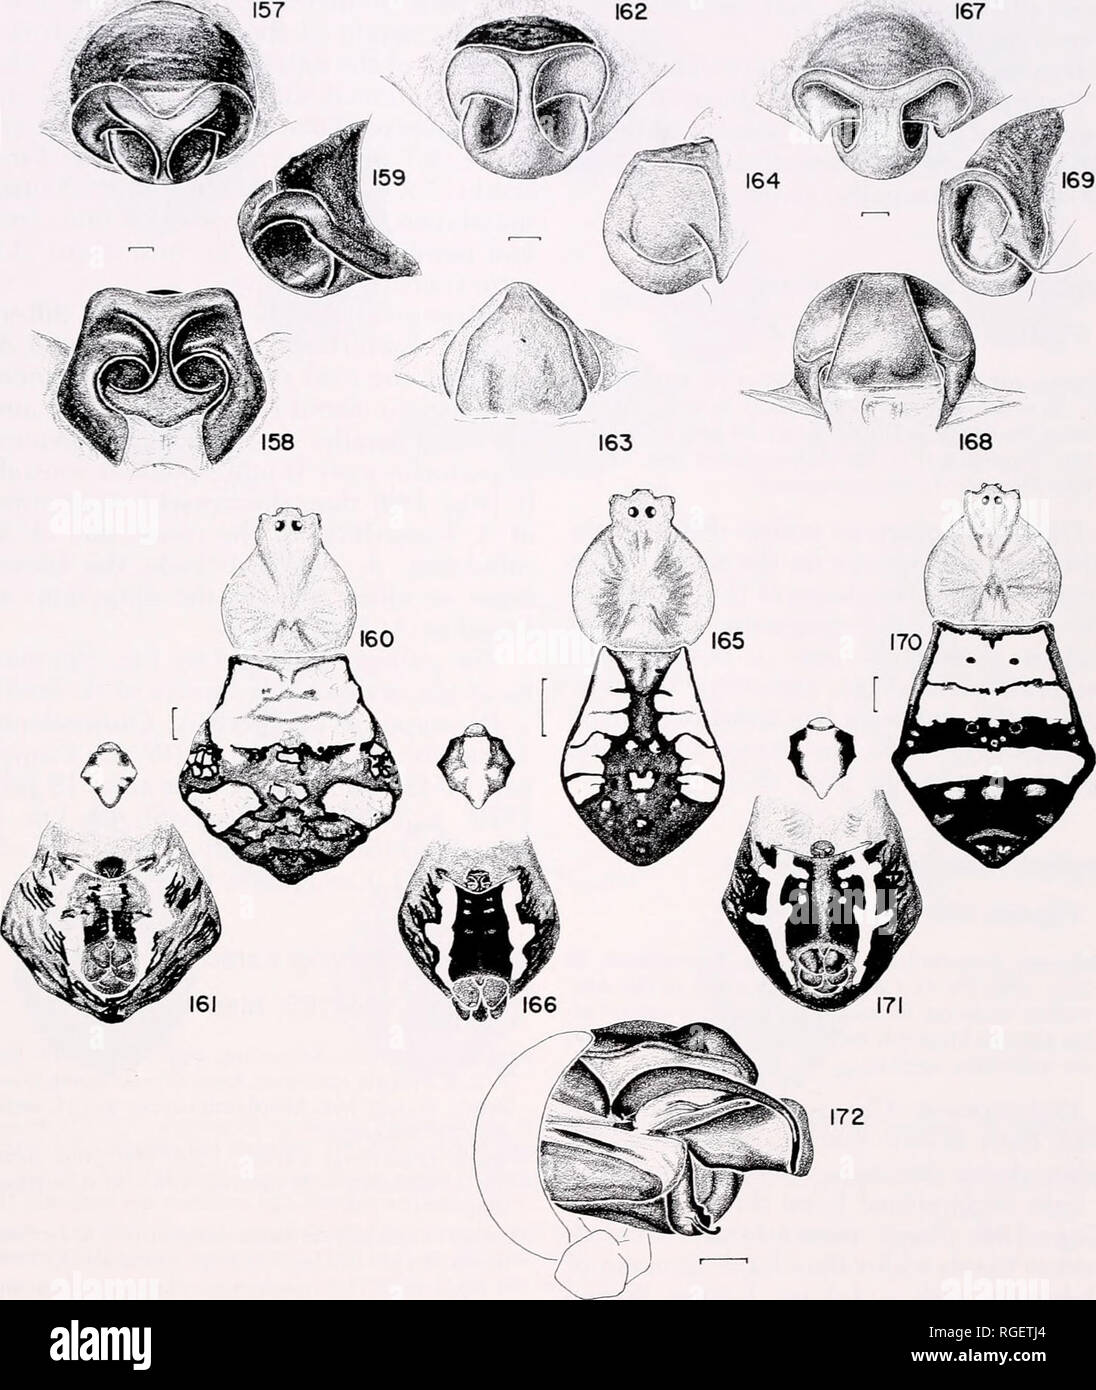 . Bulletin of the Museum of Comparative Zoology at Harvard College. Zoology. Western Pacific Argiopinae • Levi 295. Figures 157-161. Arglope possoica Merian, female. 157. Epigynum, ventral. 158. Epigynum, posterior. 159. Epigynum, lateral. 160. Carapace and abdomen. 161. Sternum and abdomen. Figures 162-166. Arglope perforata Schenkel, female. 162. Epigynum. ventral. 163. Epigynum, postenor. 164. Epigynum, lateral. 165. Carapace and abdomen. 166. Sternum and abdomen. Figures 167-172. Arglope anasuja Thorell. 167-171. Female. 167. Epigynum, ventral. 168. Epigynum, posterior. 169. Epigy- num, la Stock Photo